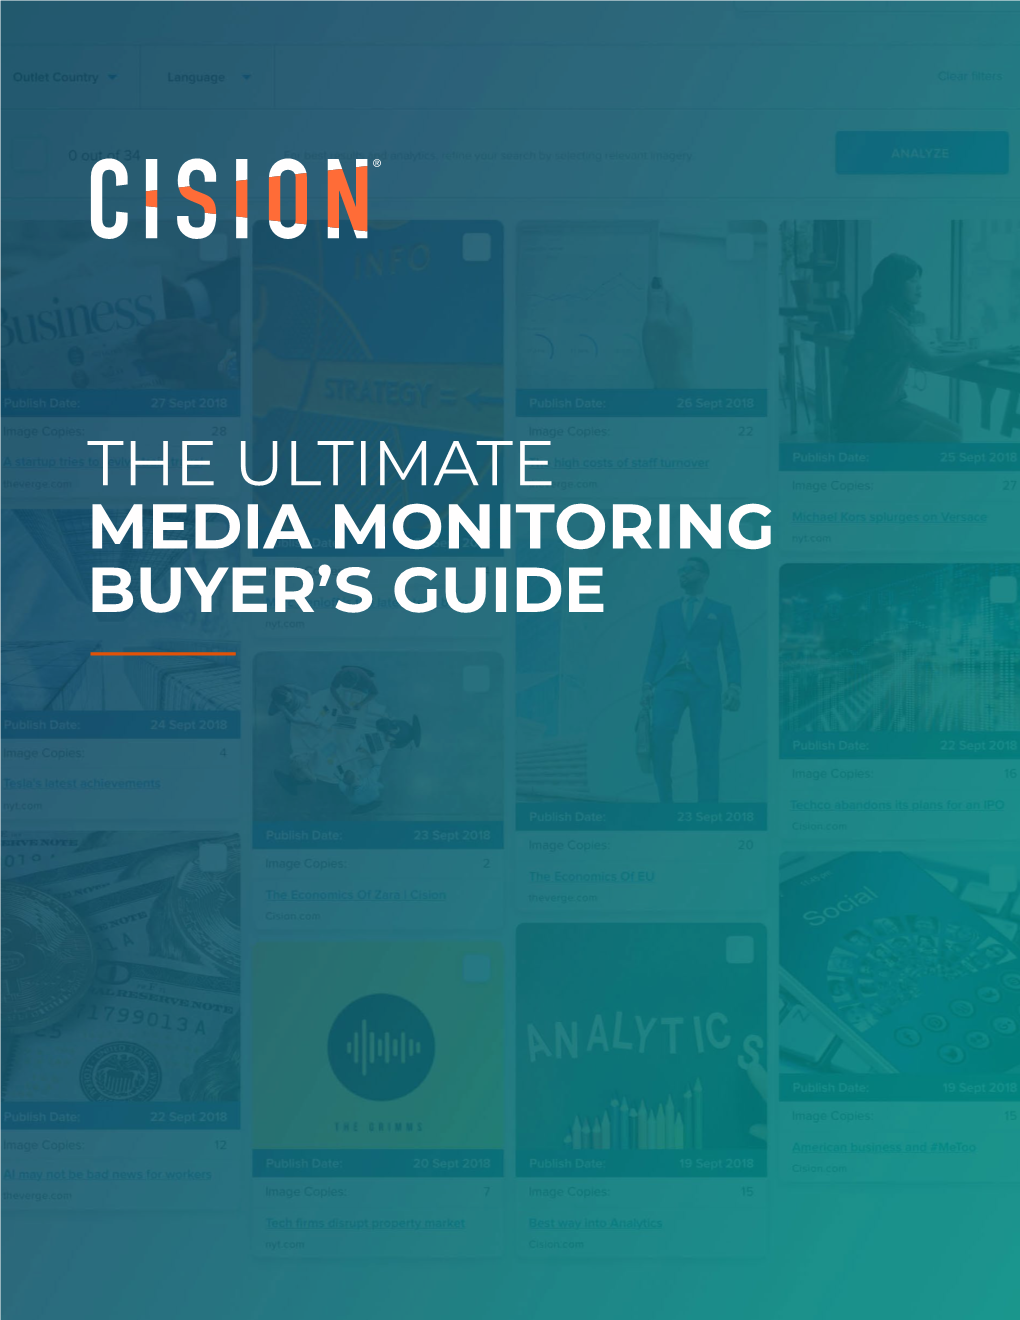 The Ultimate Media Monitoring Buyer's Guide